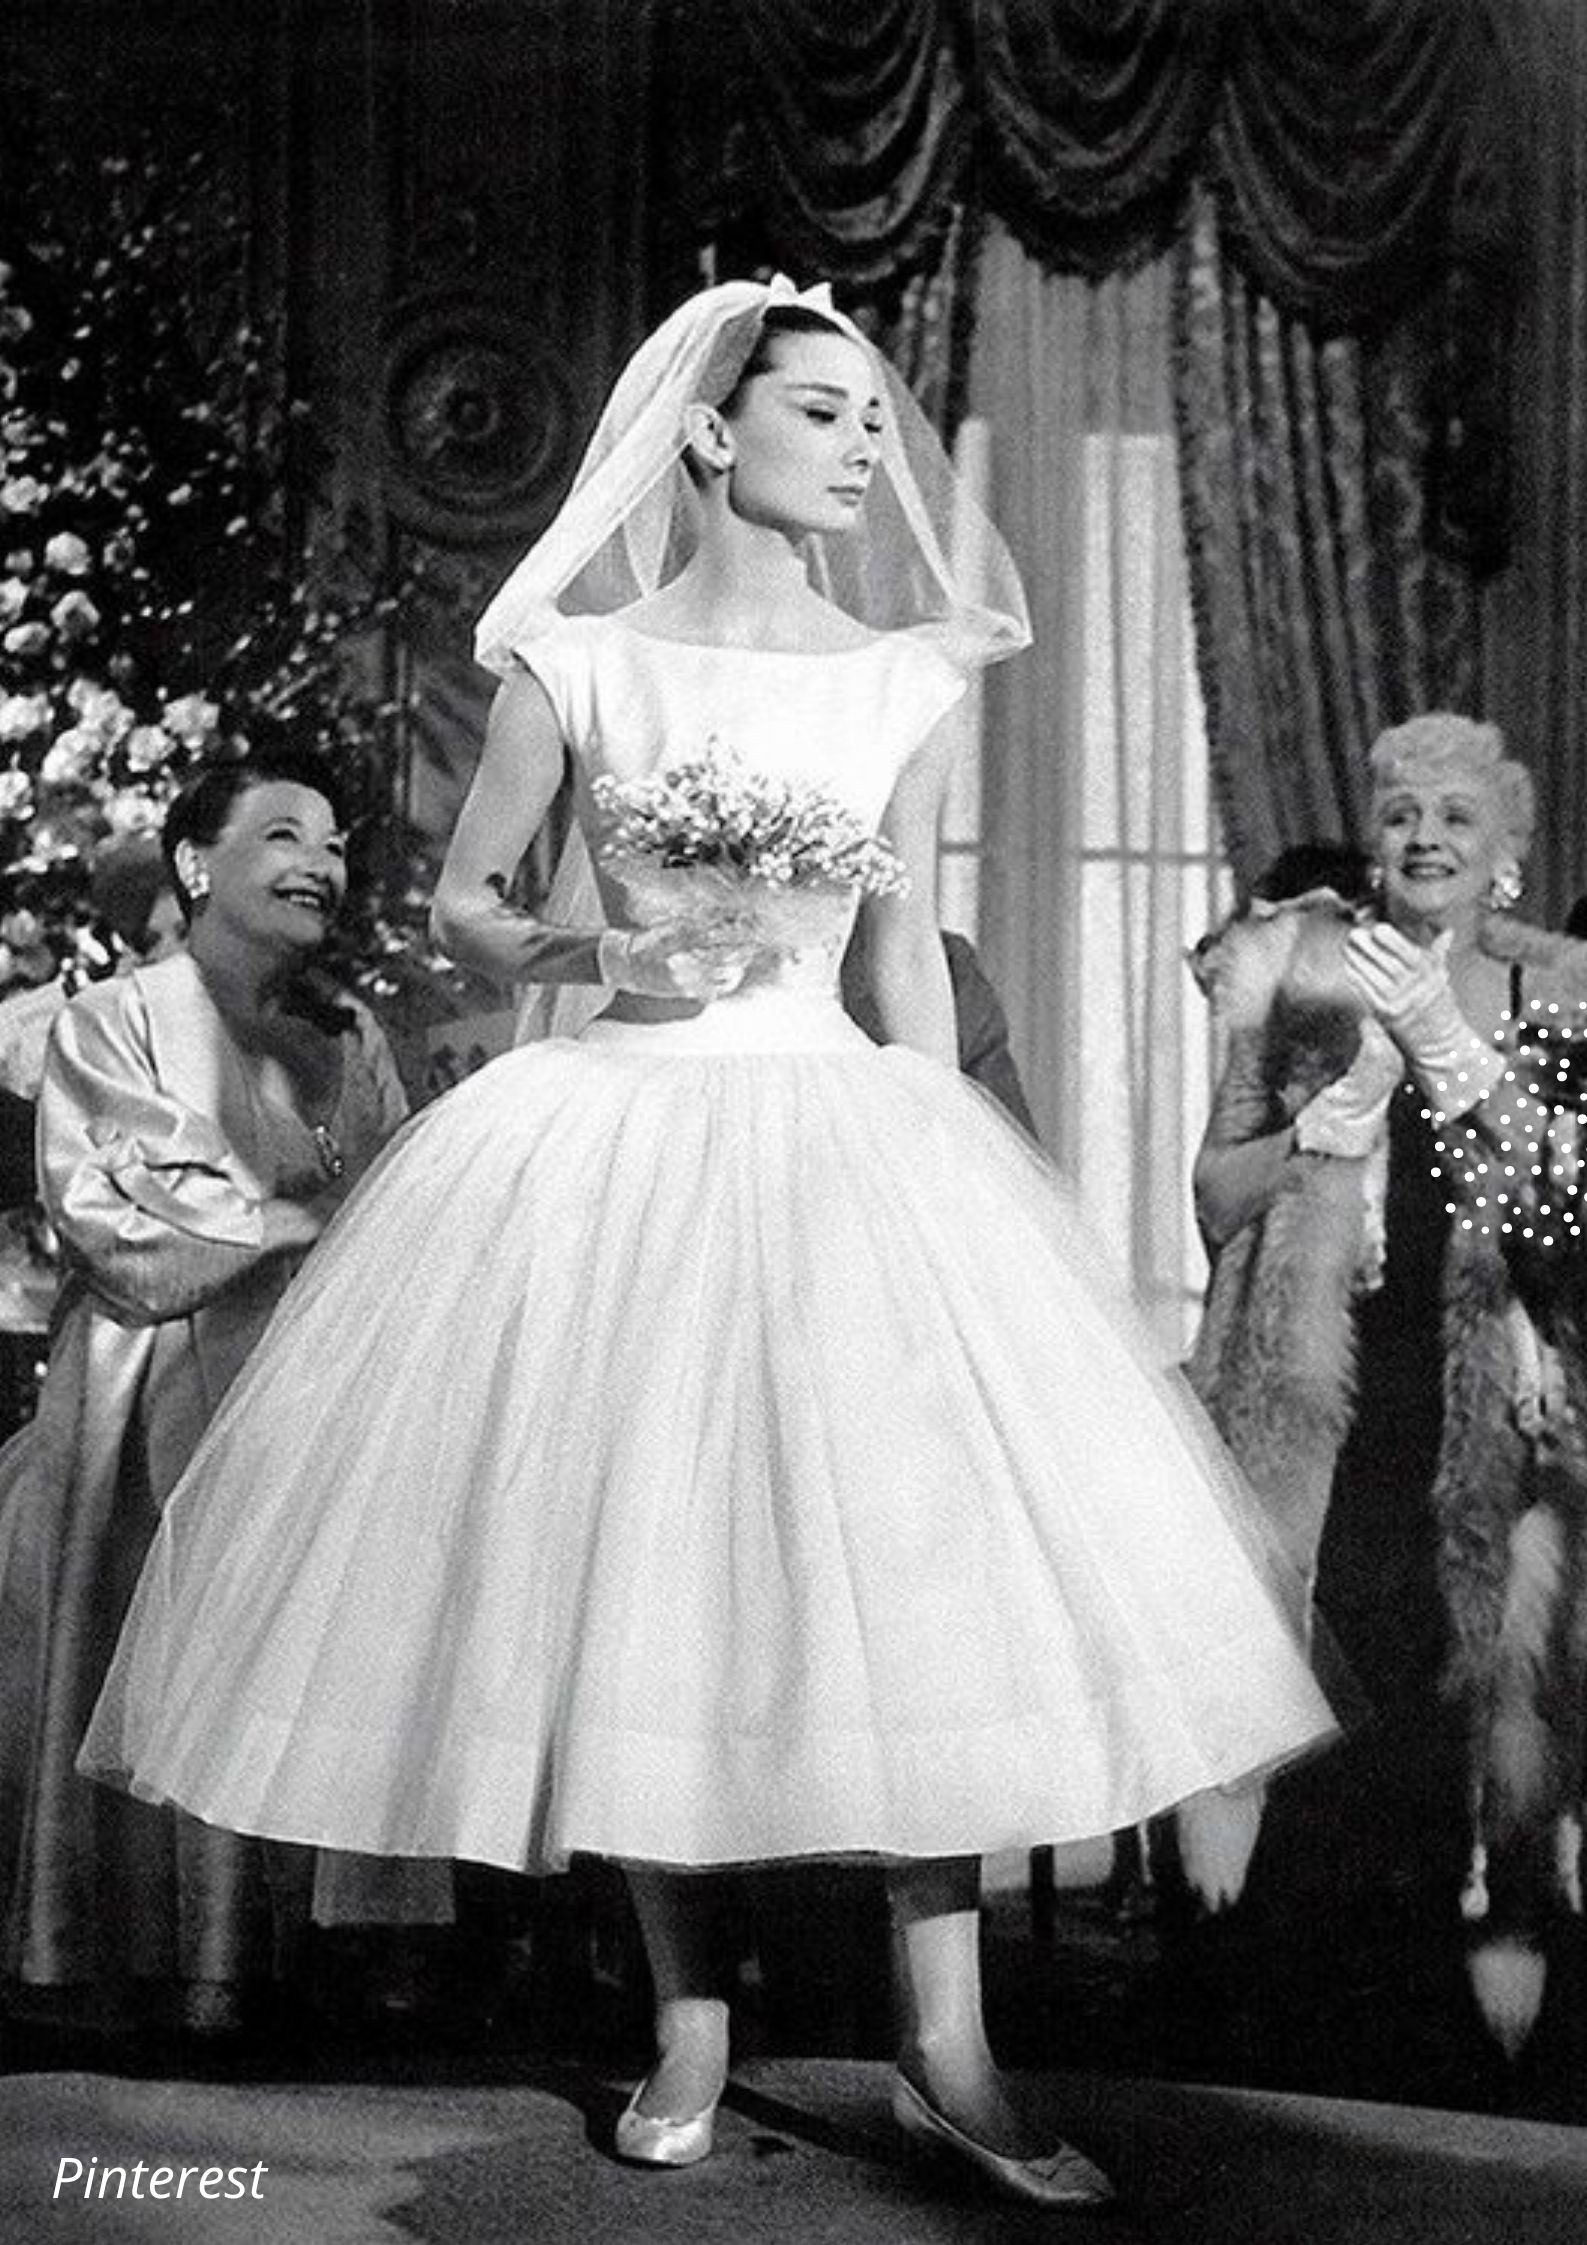 The Best Celebrity Wedding Dresses in History